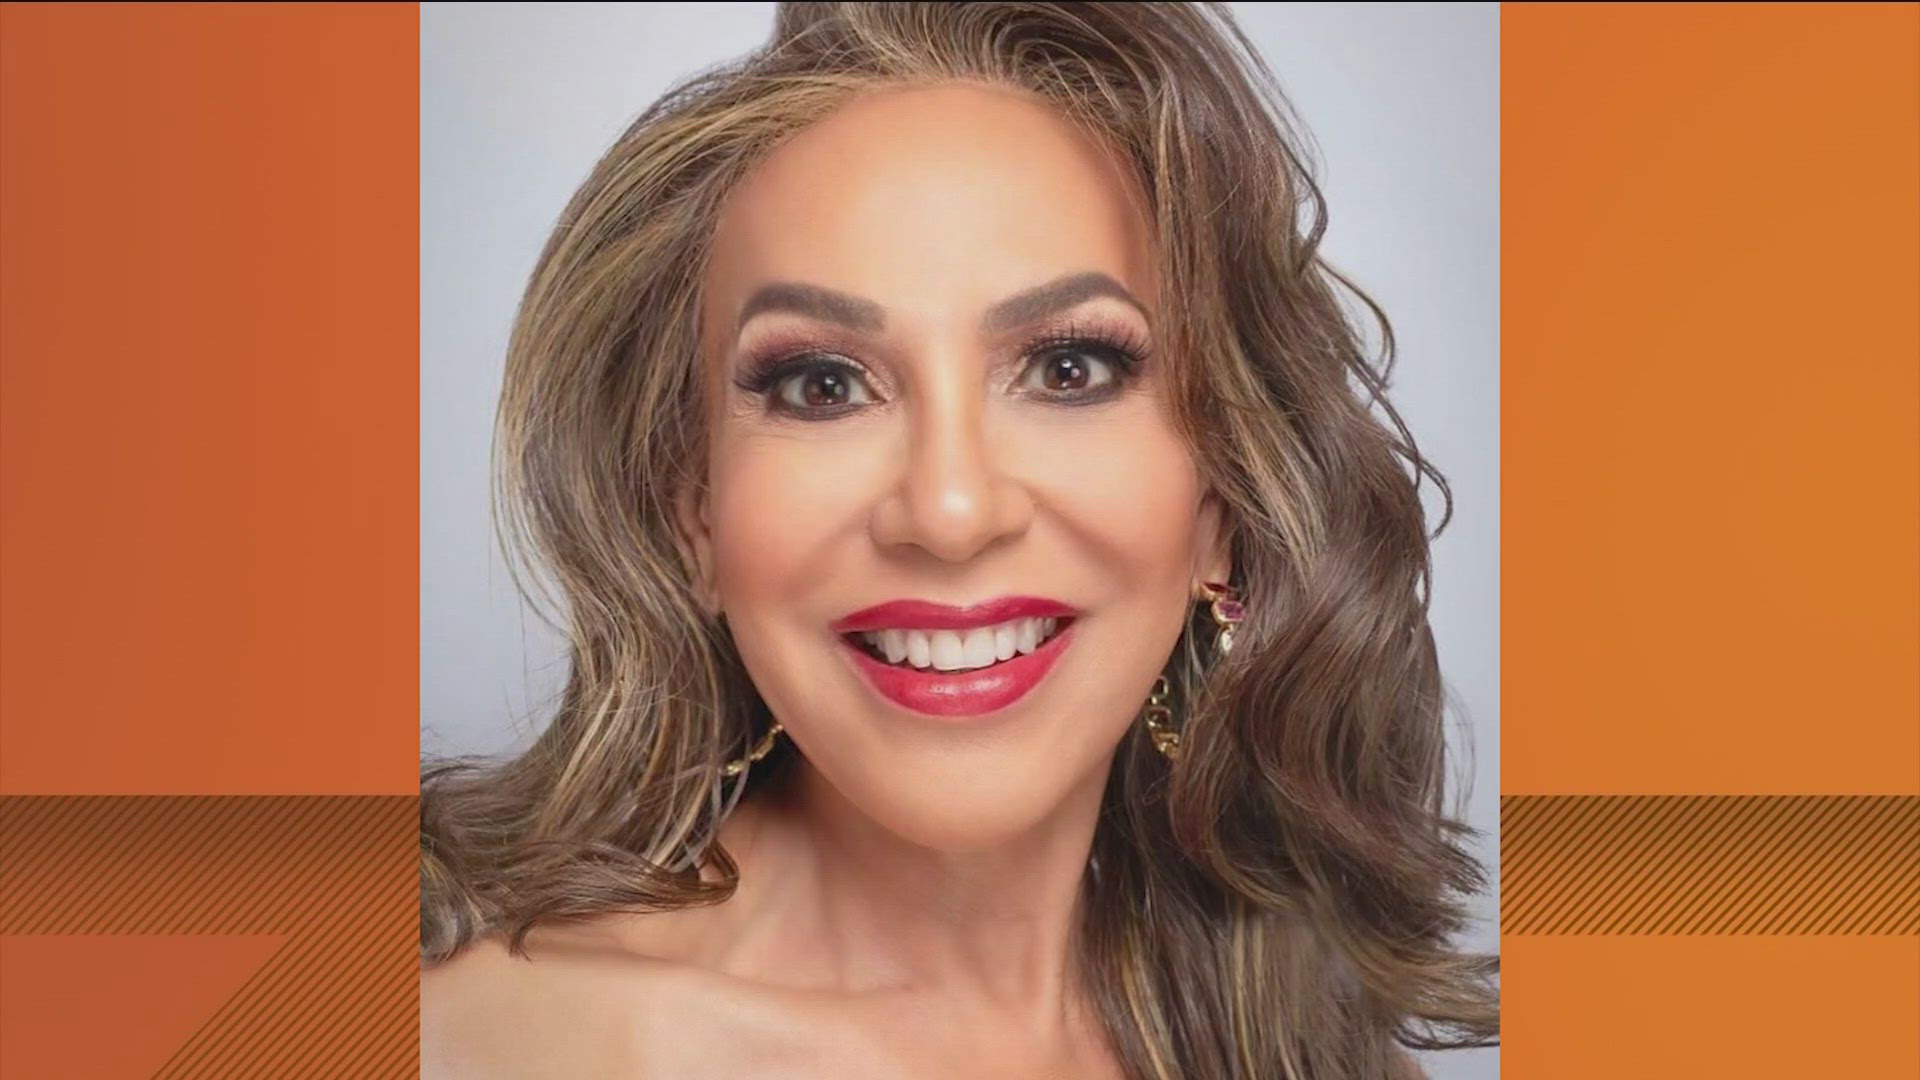 A 71-year-old El Paso woman made history as the oldest contestant in the Miss Texas USA pageant.